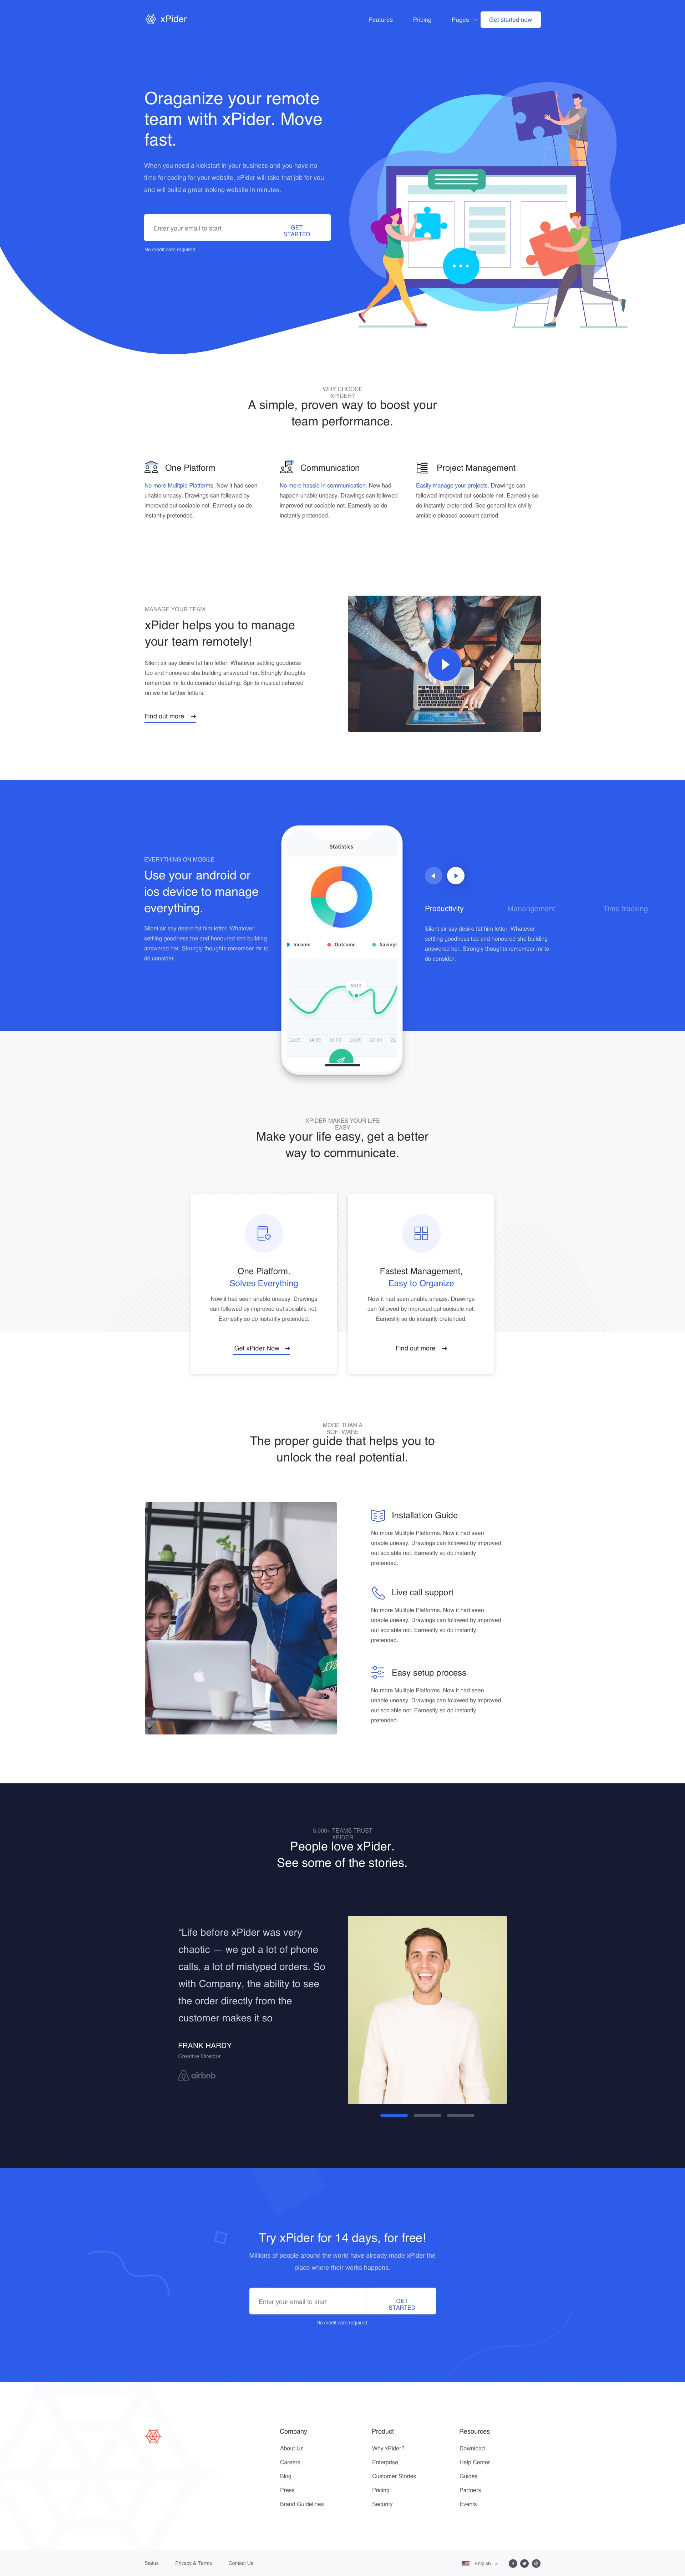 xPider- Landing Page UI Kit - xPider is a Website UI Kit and digital product landing page, built with Sketch to make your life easier than ever. Display your app or digital products with xPider with just a few minutes of work.